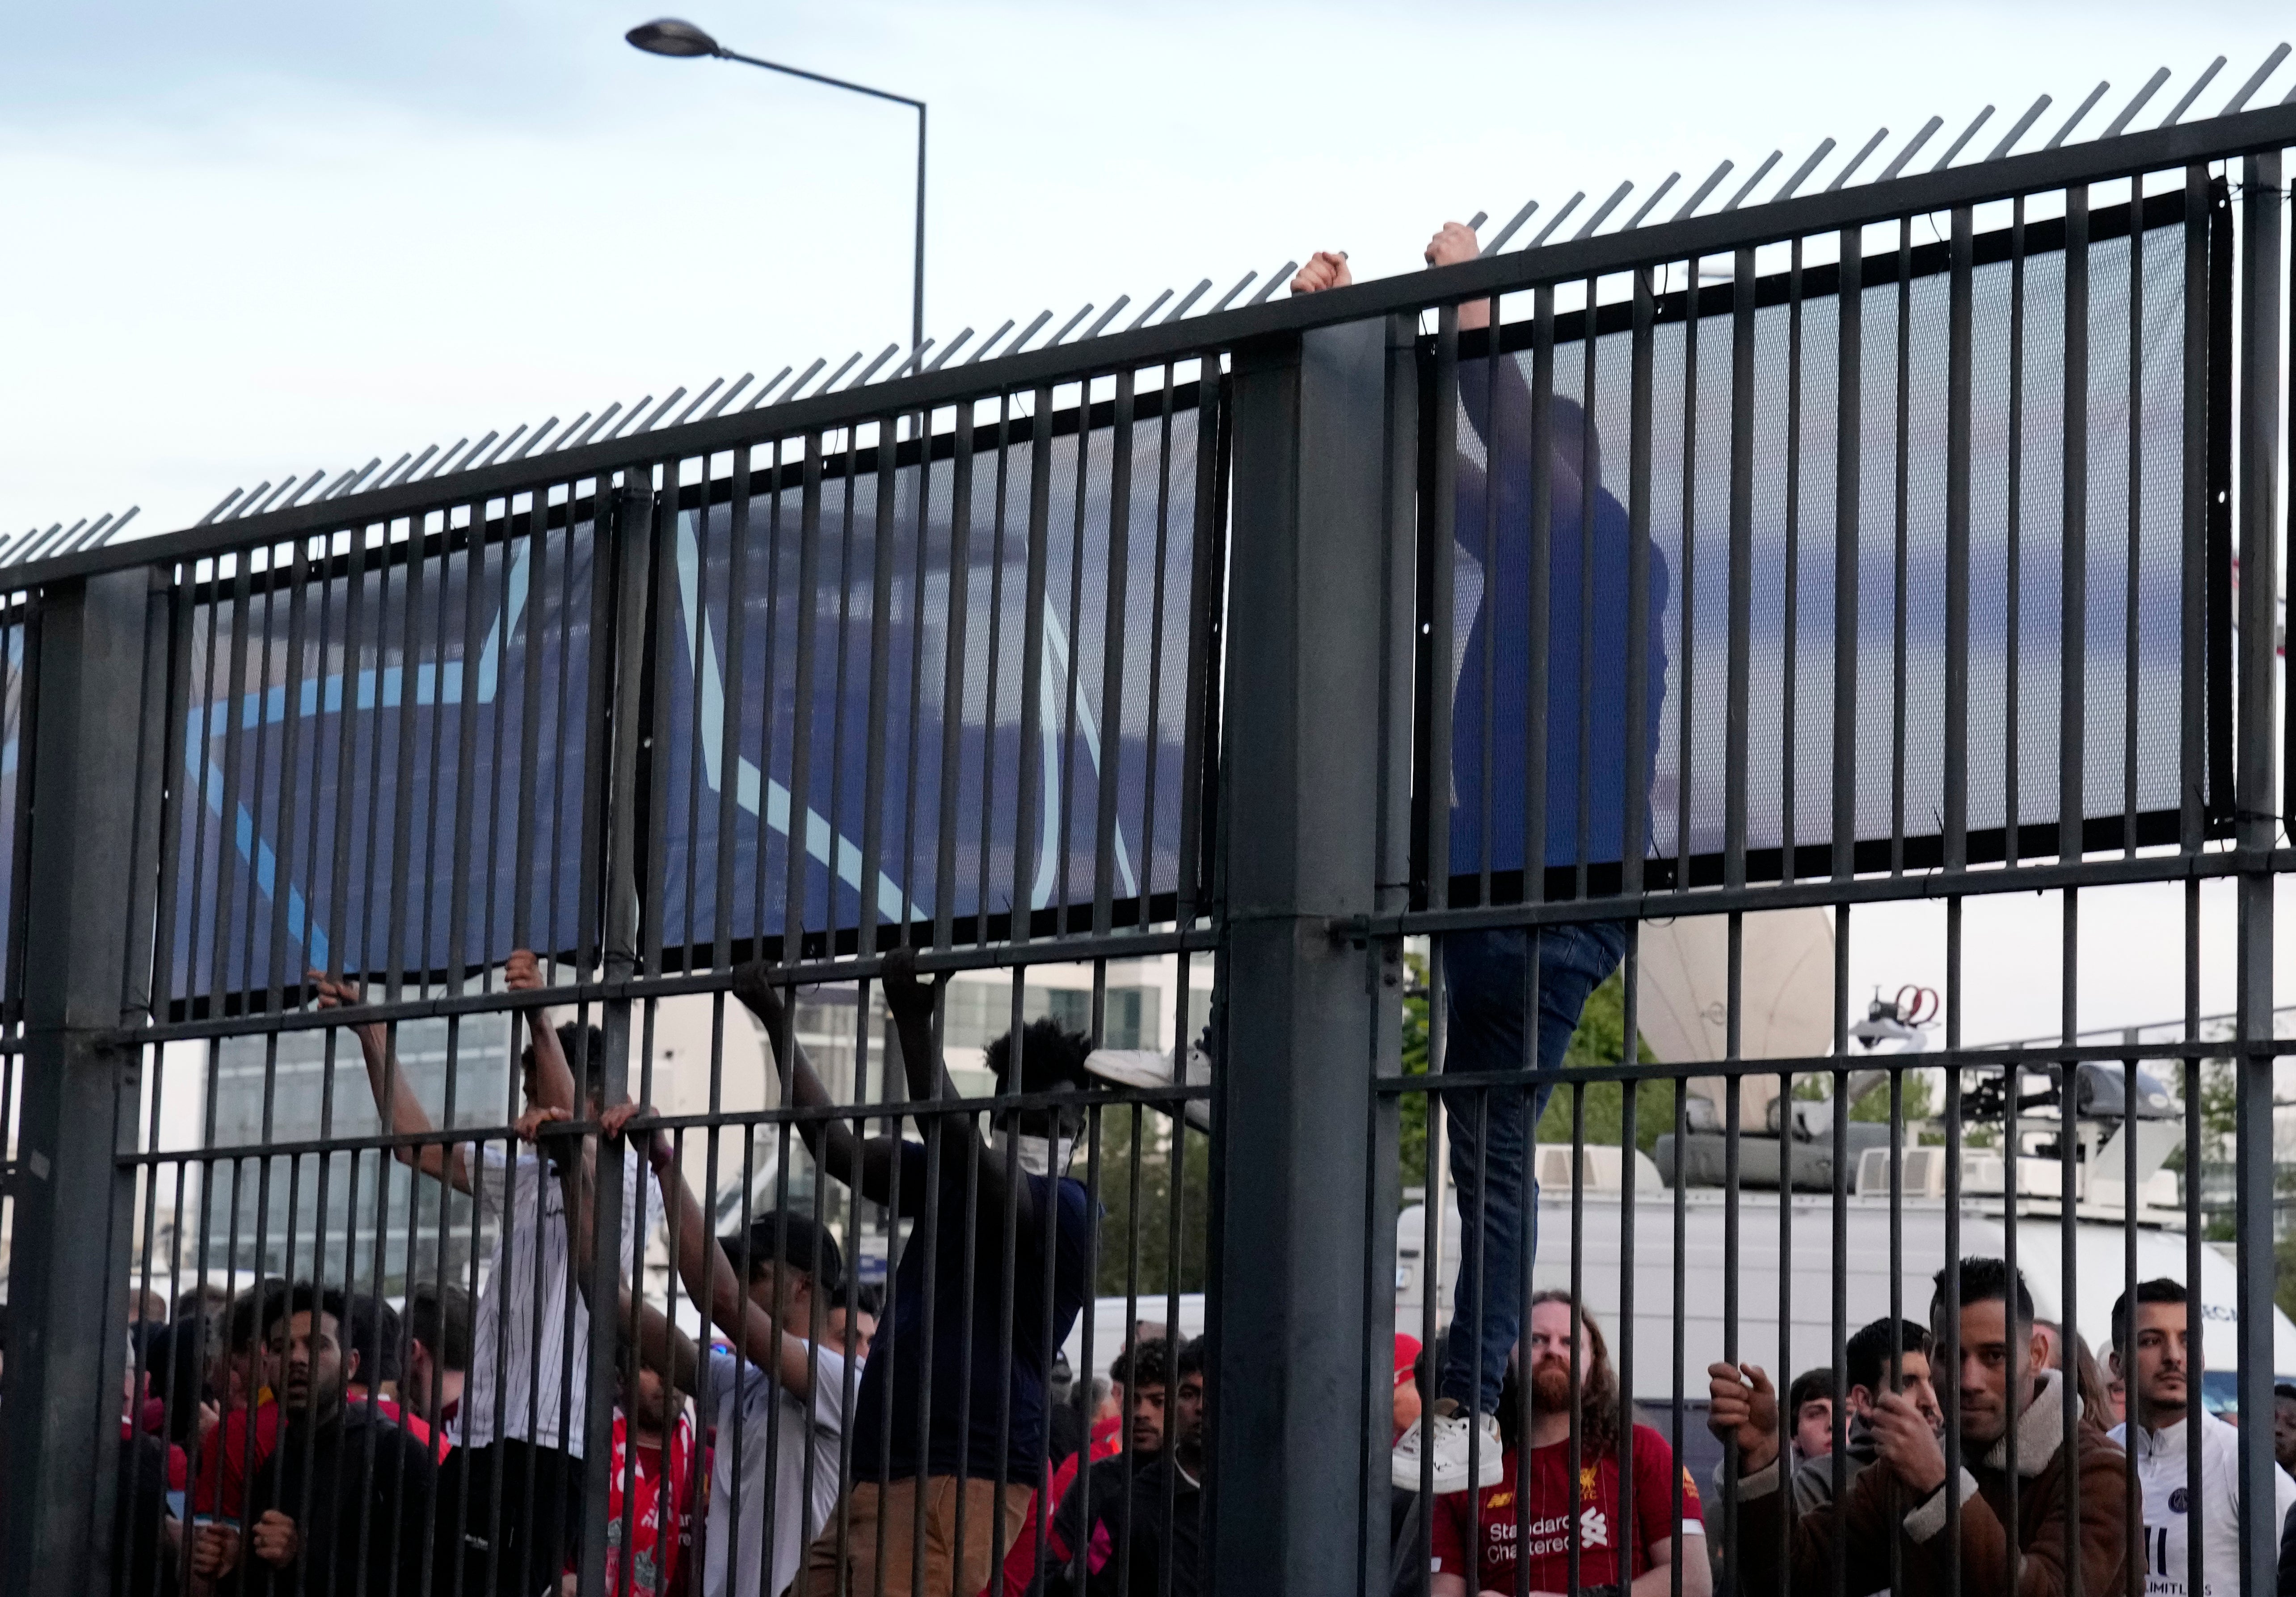 Some fans were spotted trying to climb the security fence